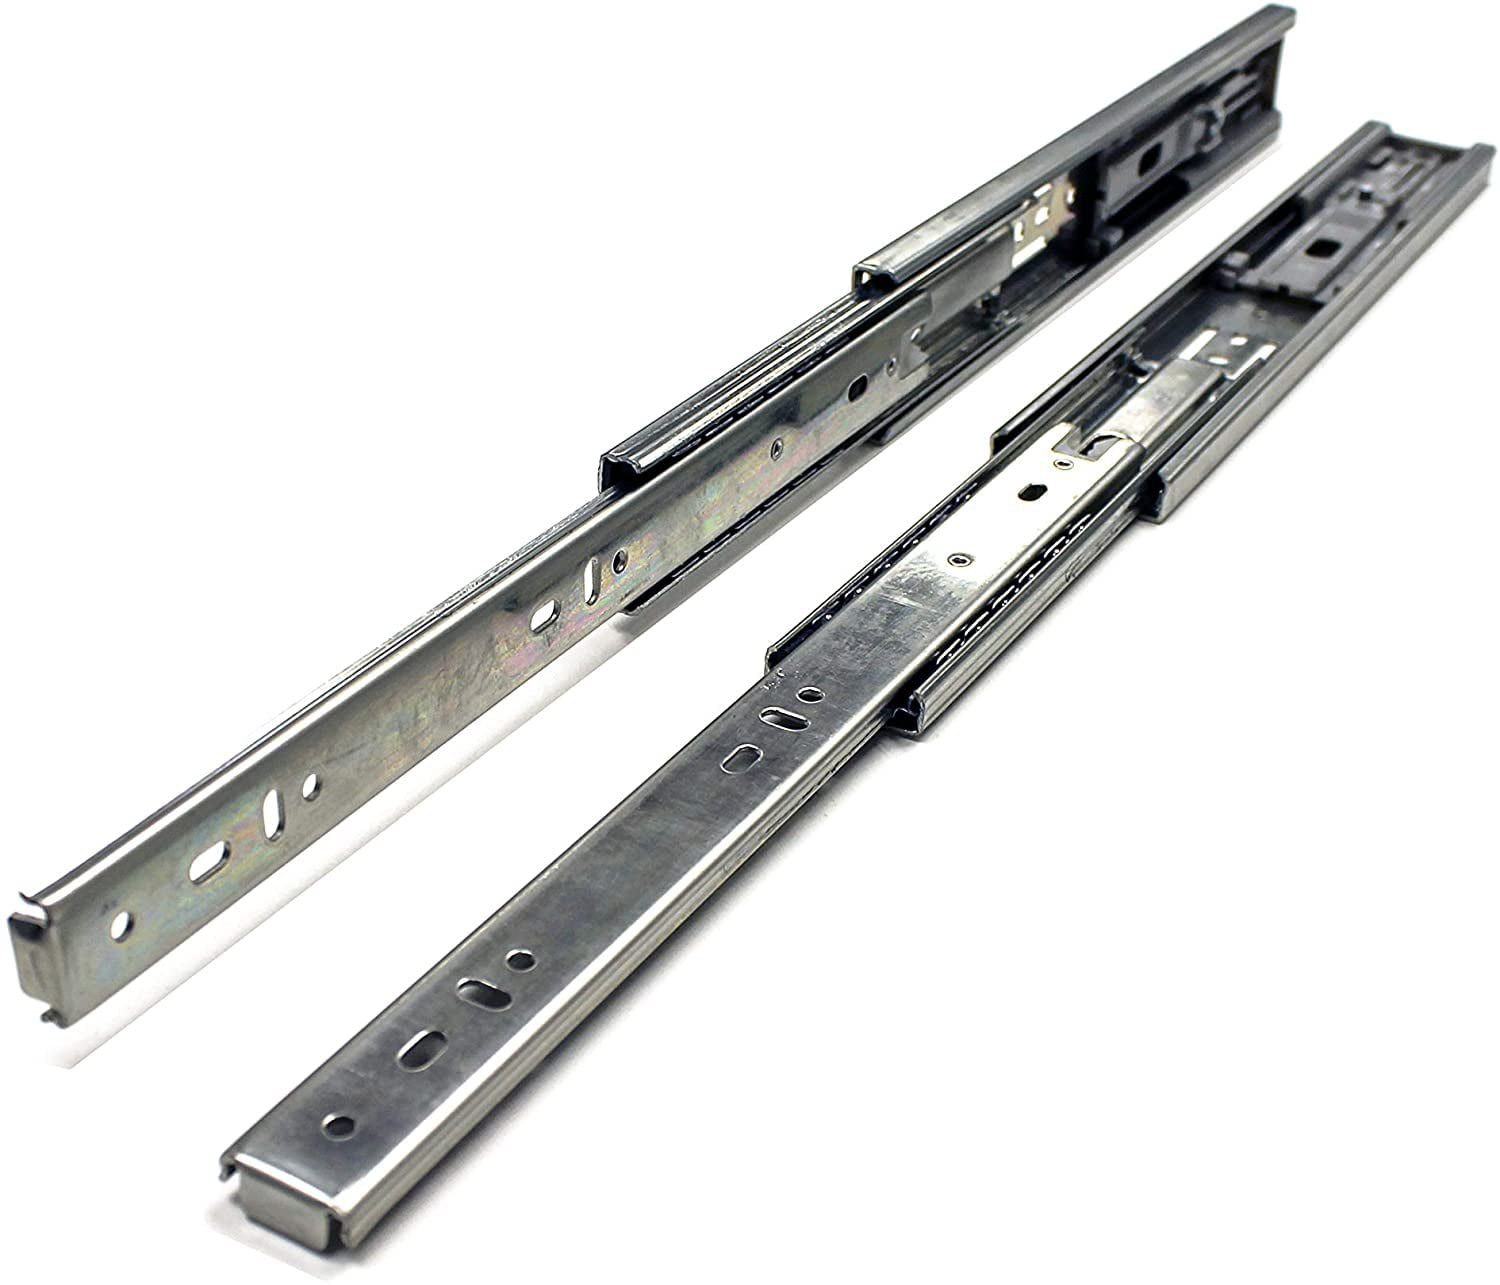 Full Extension 3 Section Ball Bearing Side Mounted Drawer Slider for Drawer Slide Under Stairs,Black-Closed100cm-stretched225cm SANJIANG Heavy Drawer Slides 